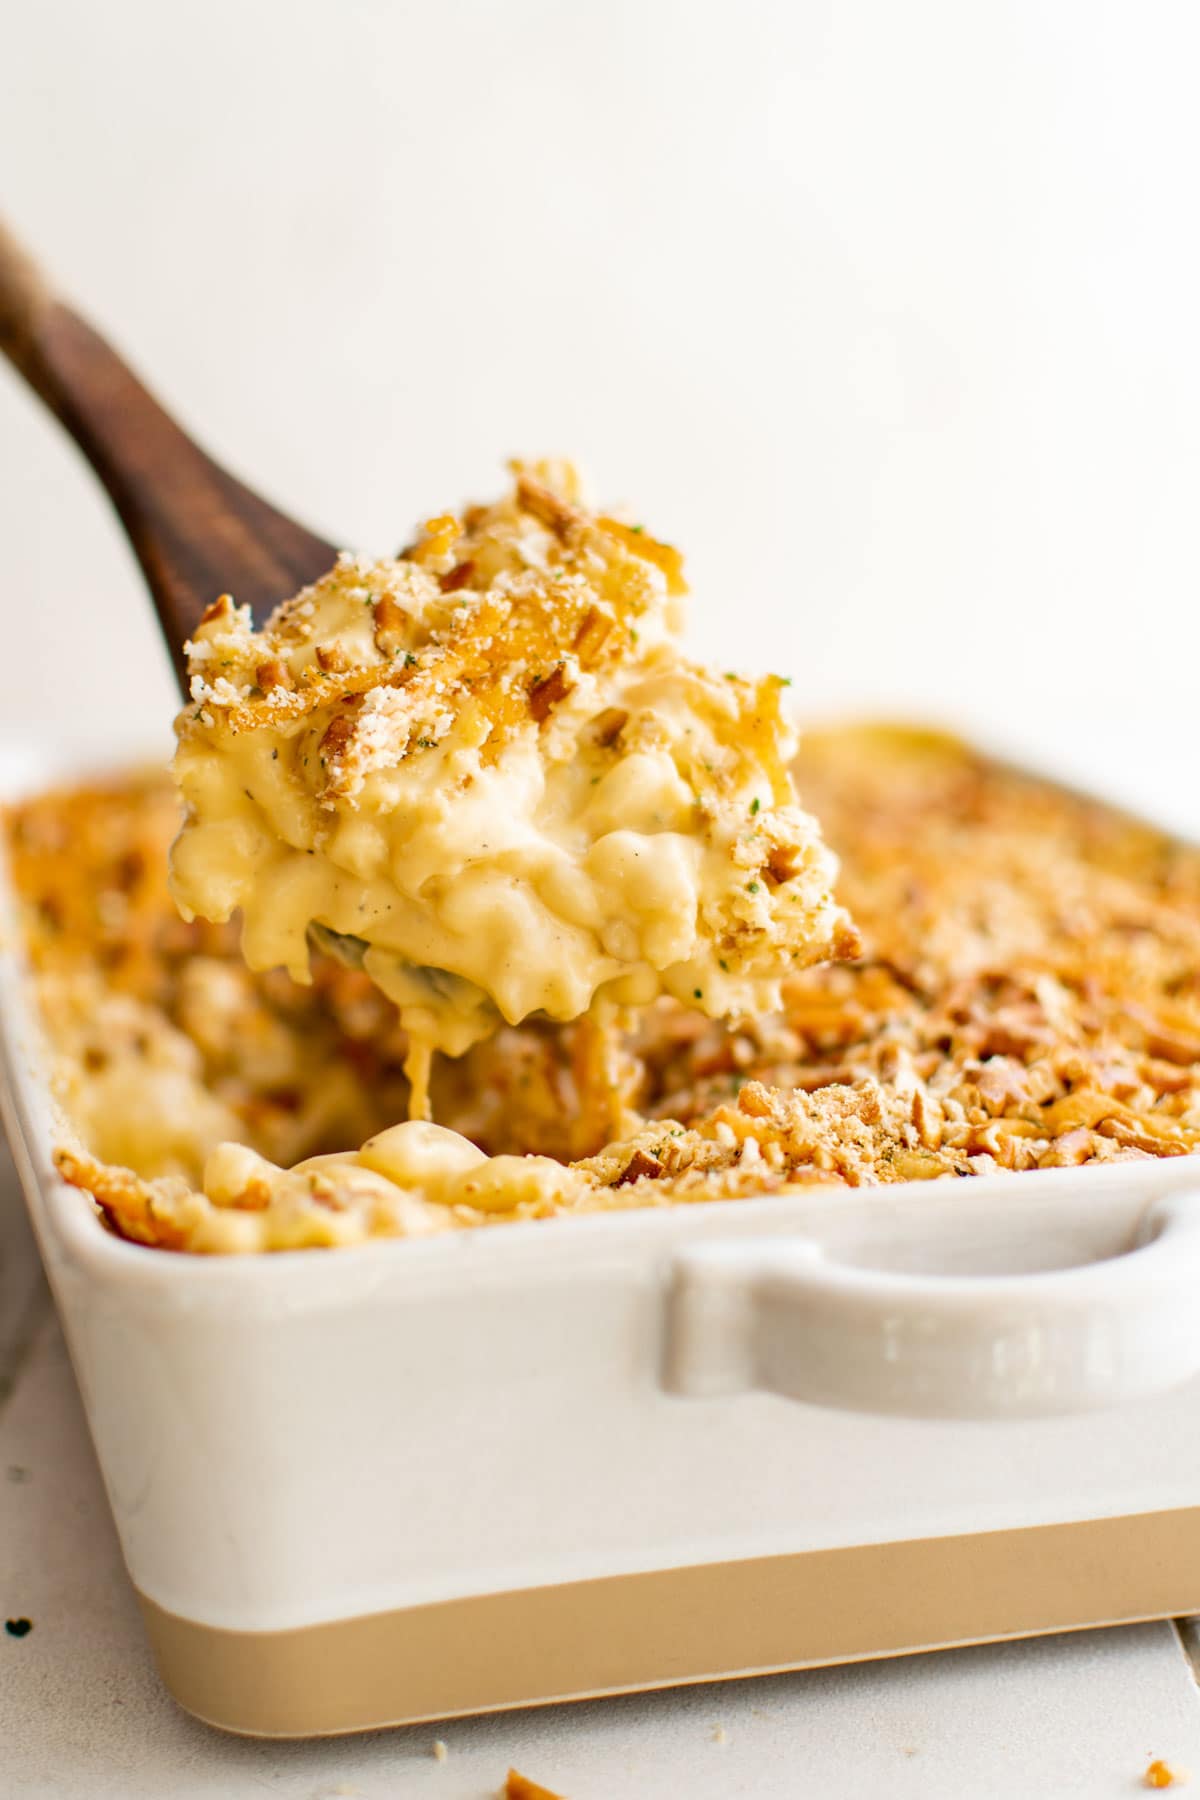 Baked macaroni and cheese in a white ceramic dish with a pretzel crust and a wooden spoon.